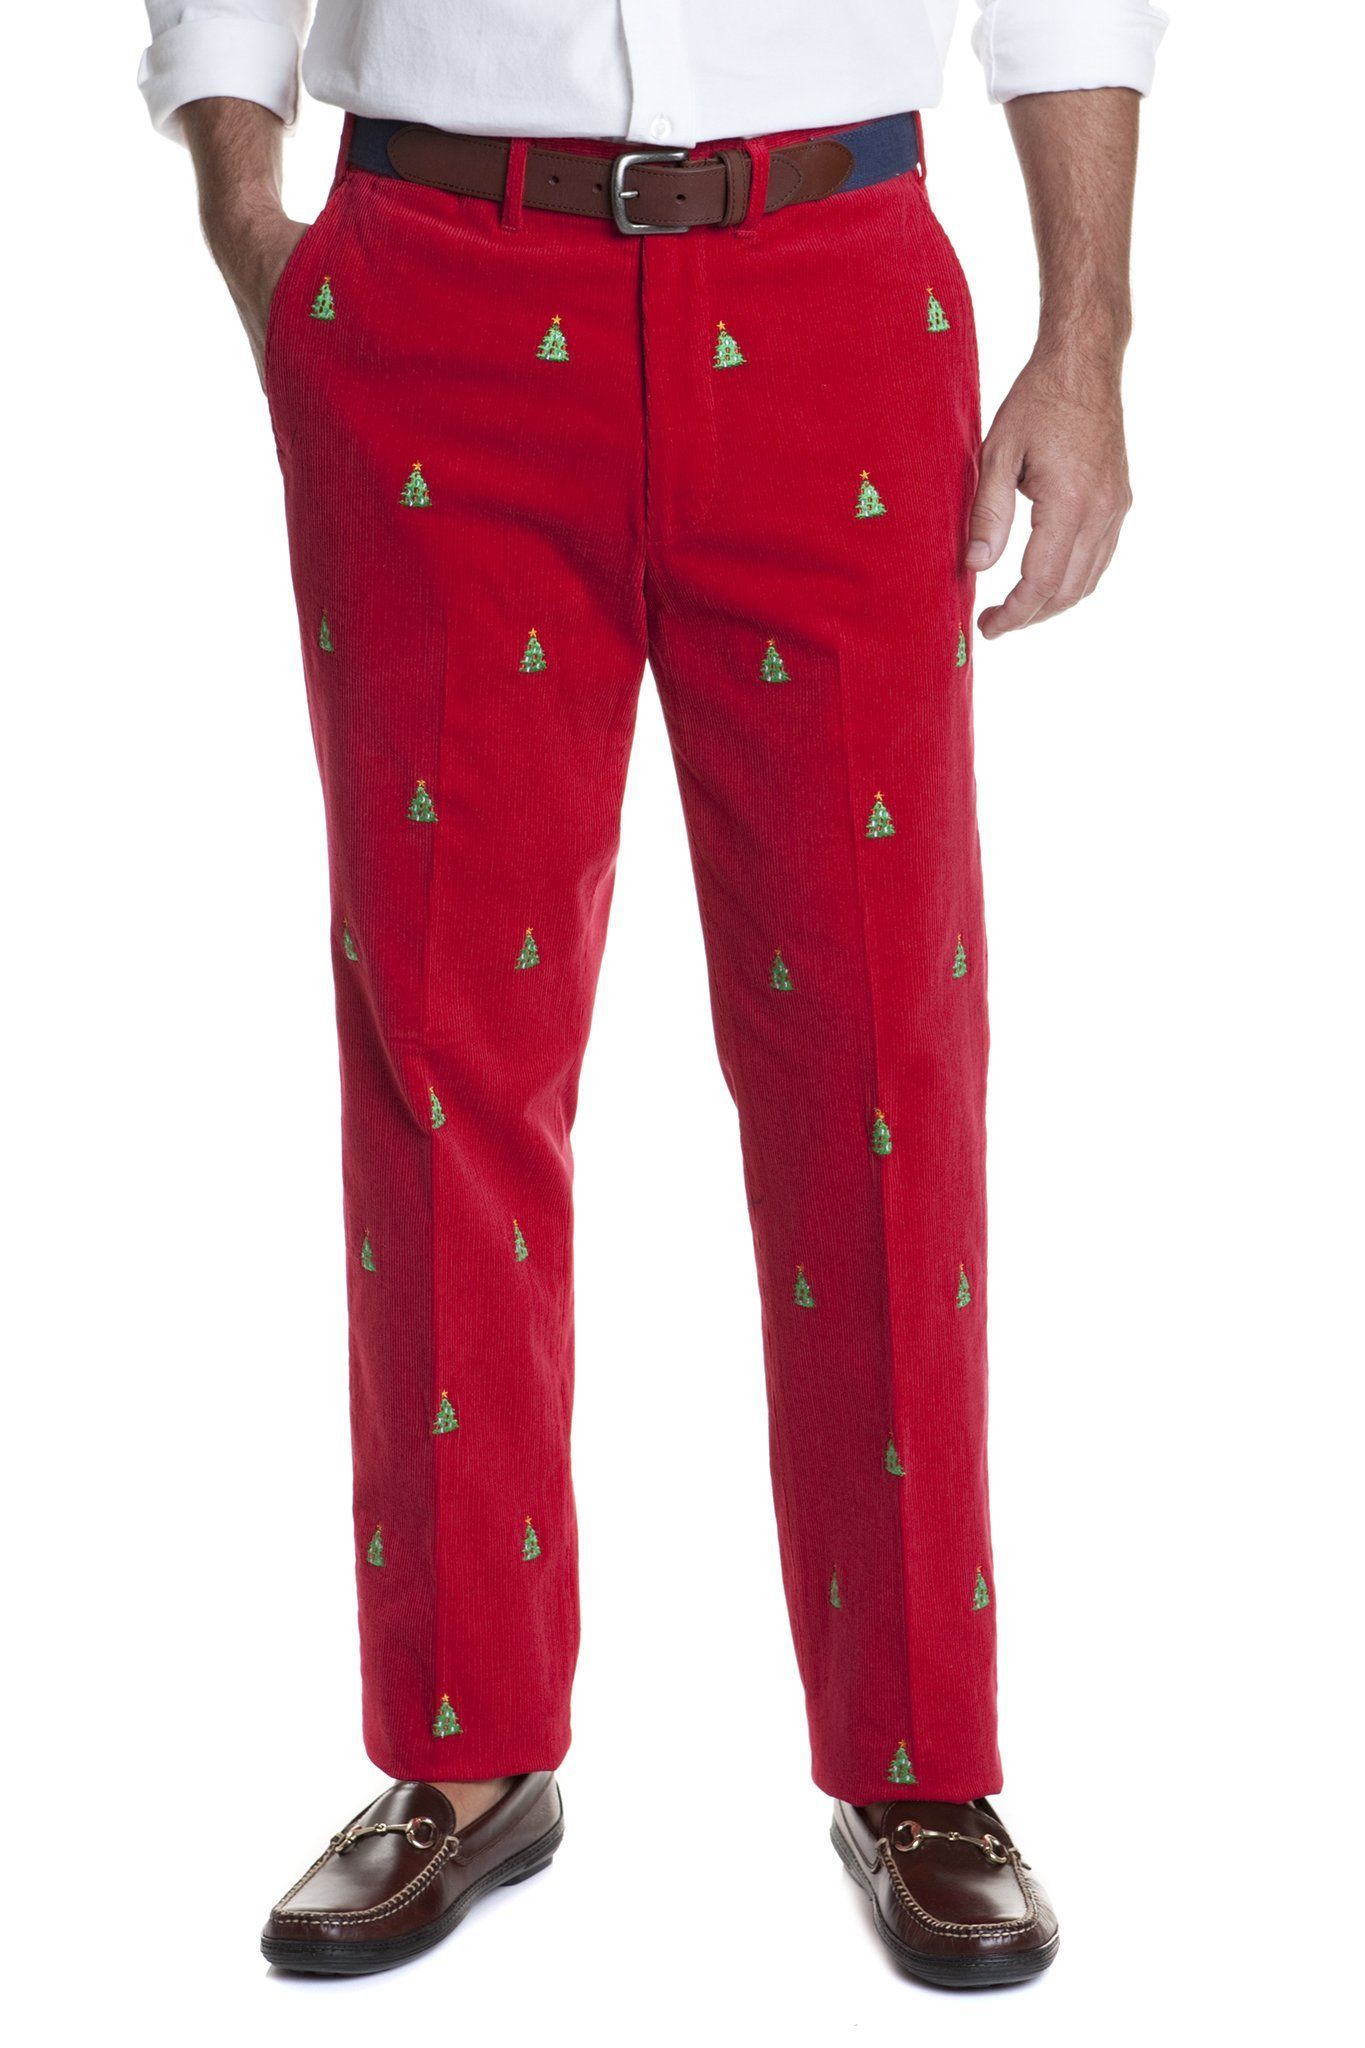 Beachcomber Corduroy Mens Embroidered Holiday Pant with Christmas